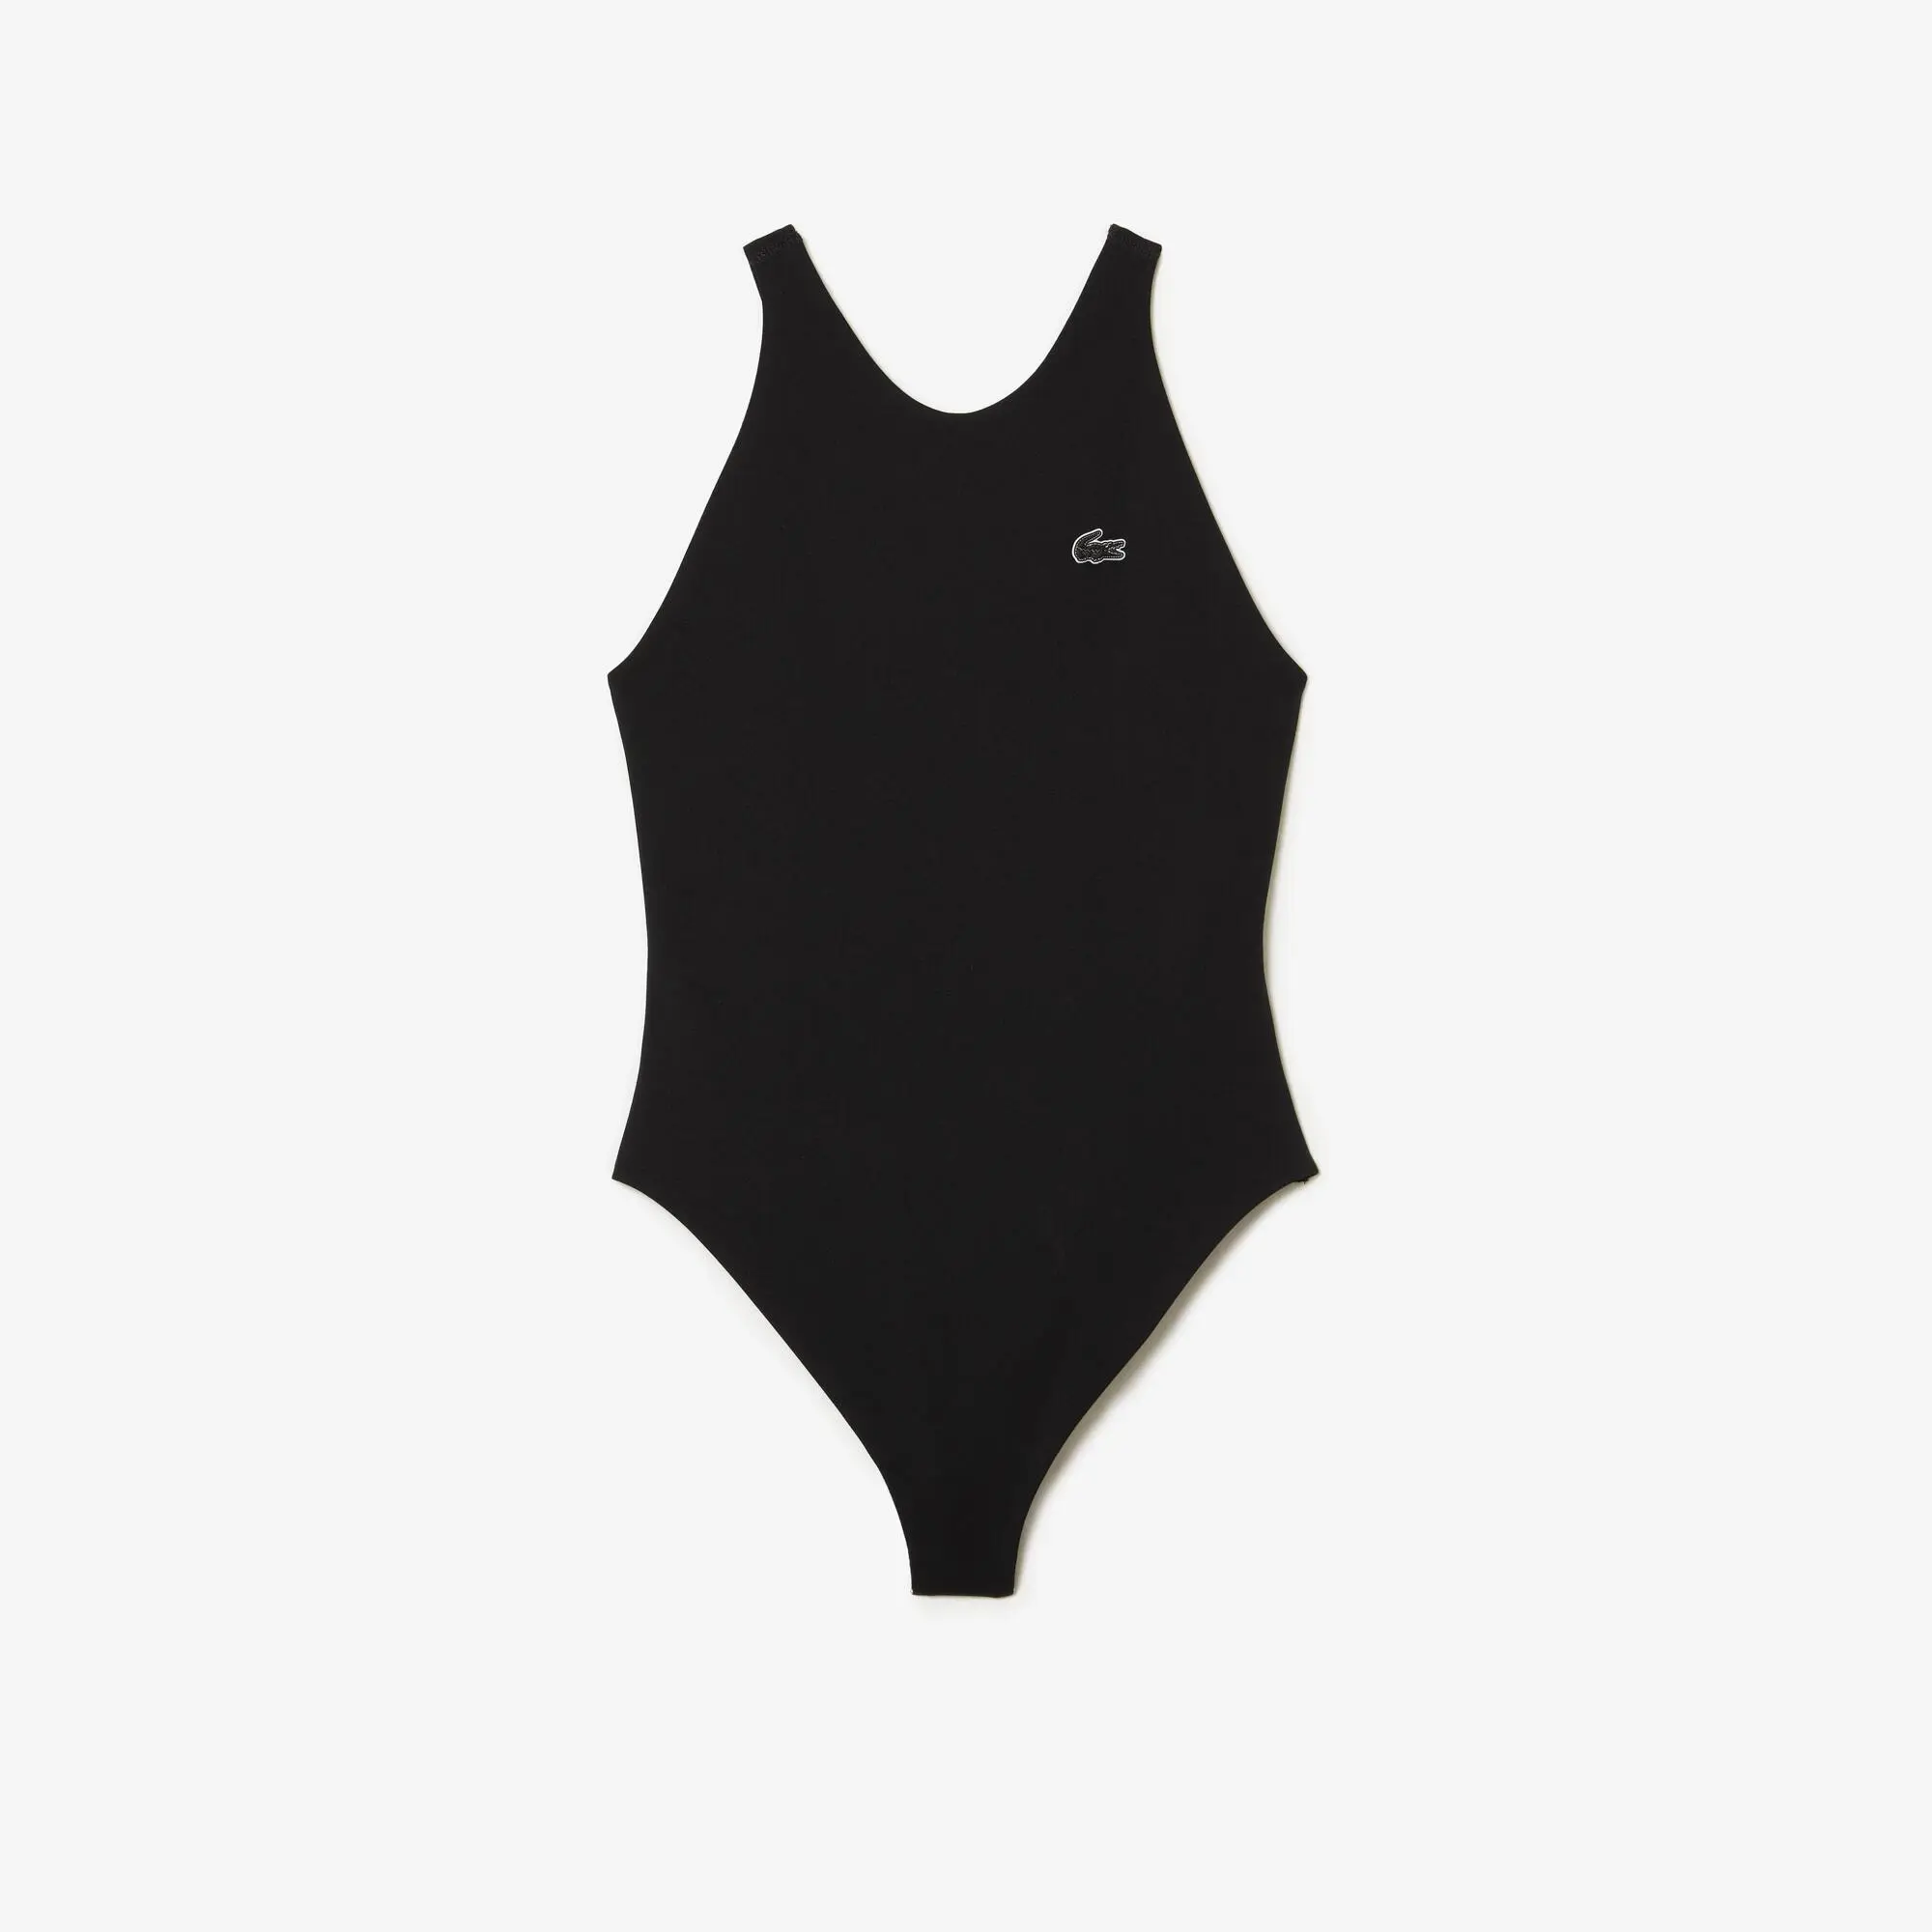 Lacoste Women’s Lacoste One-Piece Recycled Polyamide Swimsuit. 2